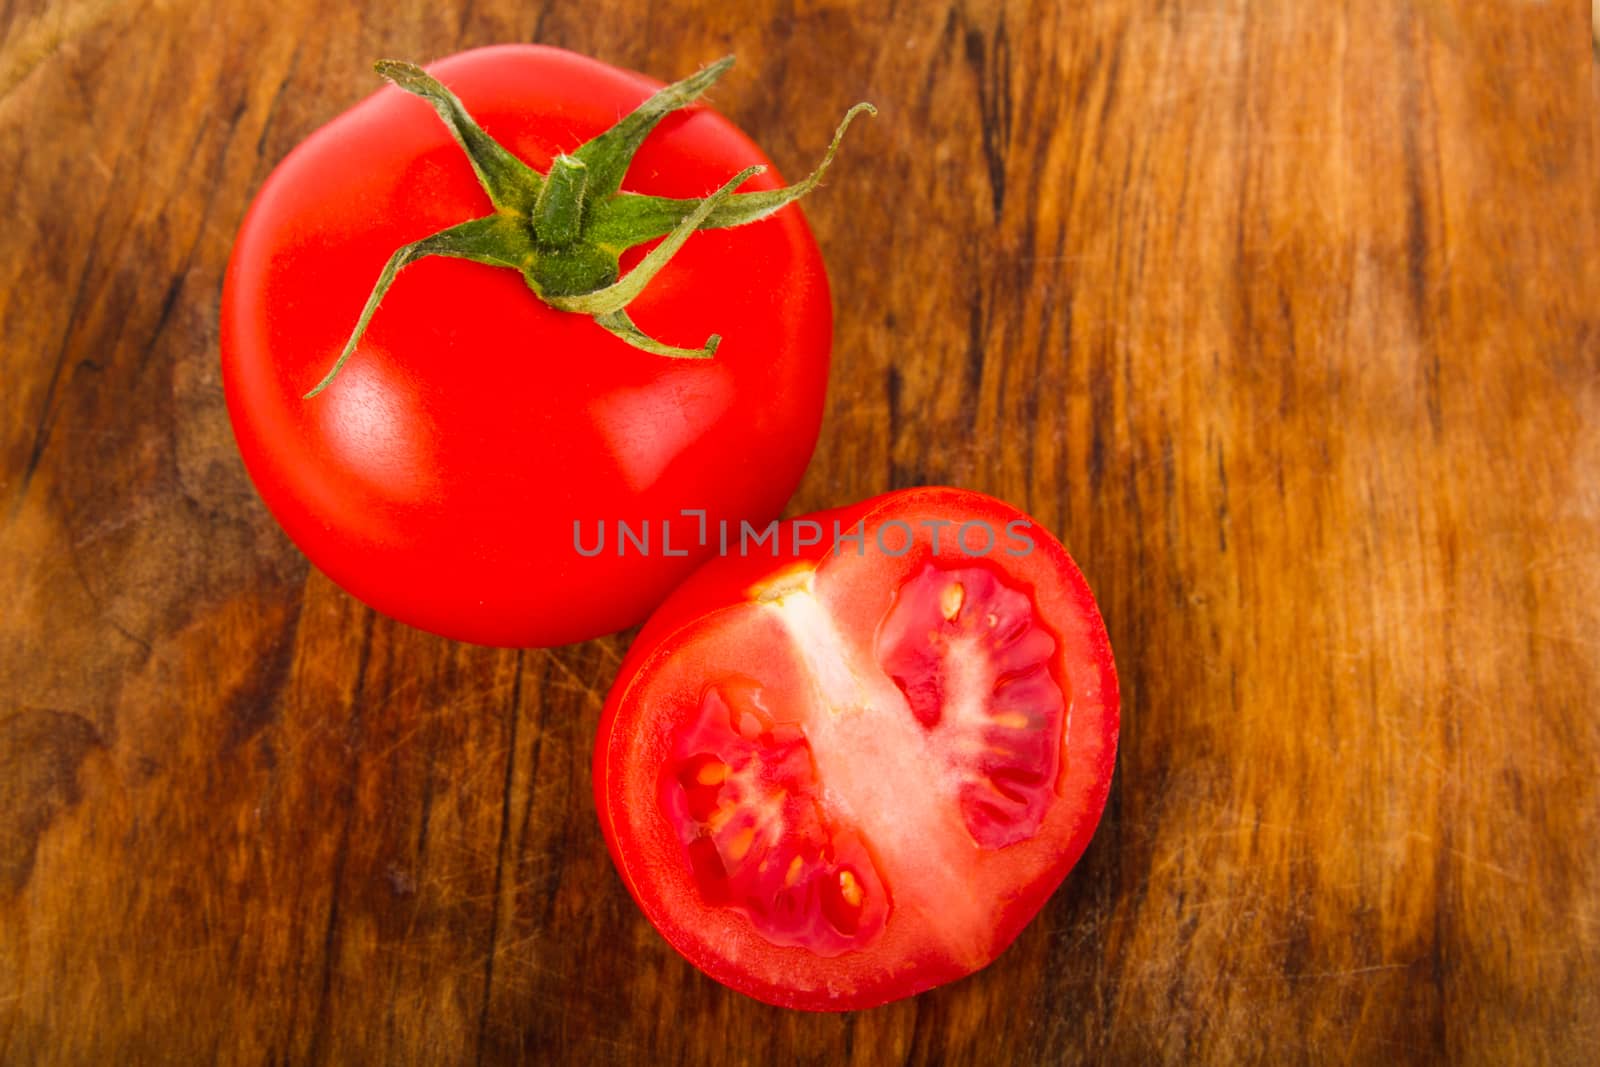 Juicy ripe tomatoes on the table - Stock Image